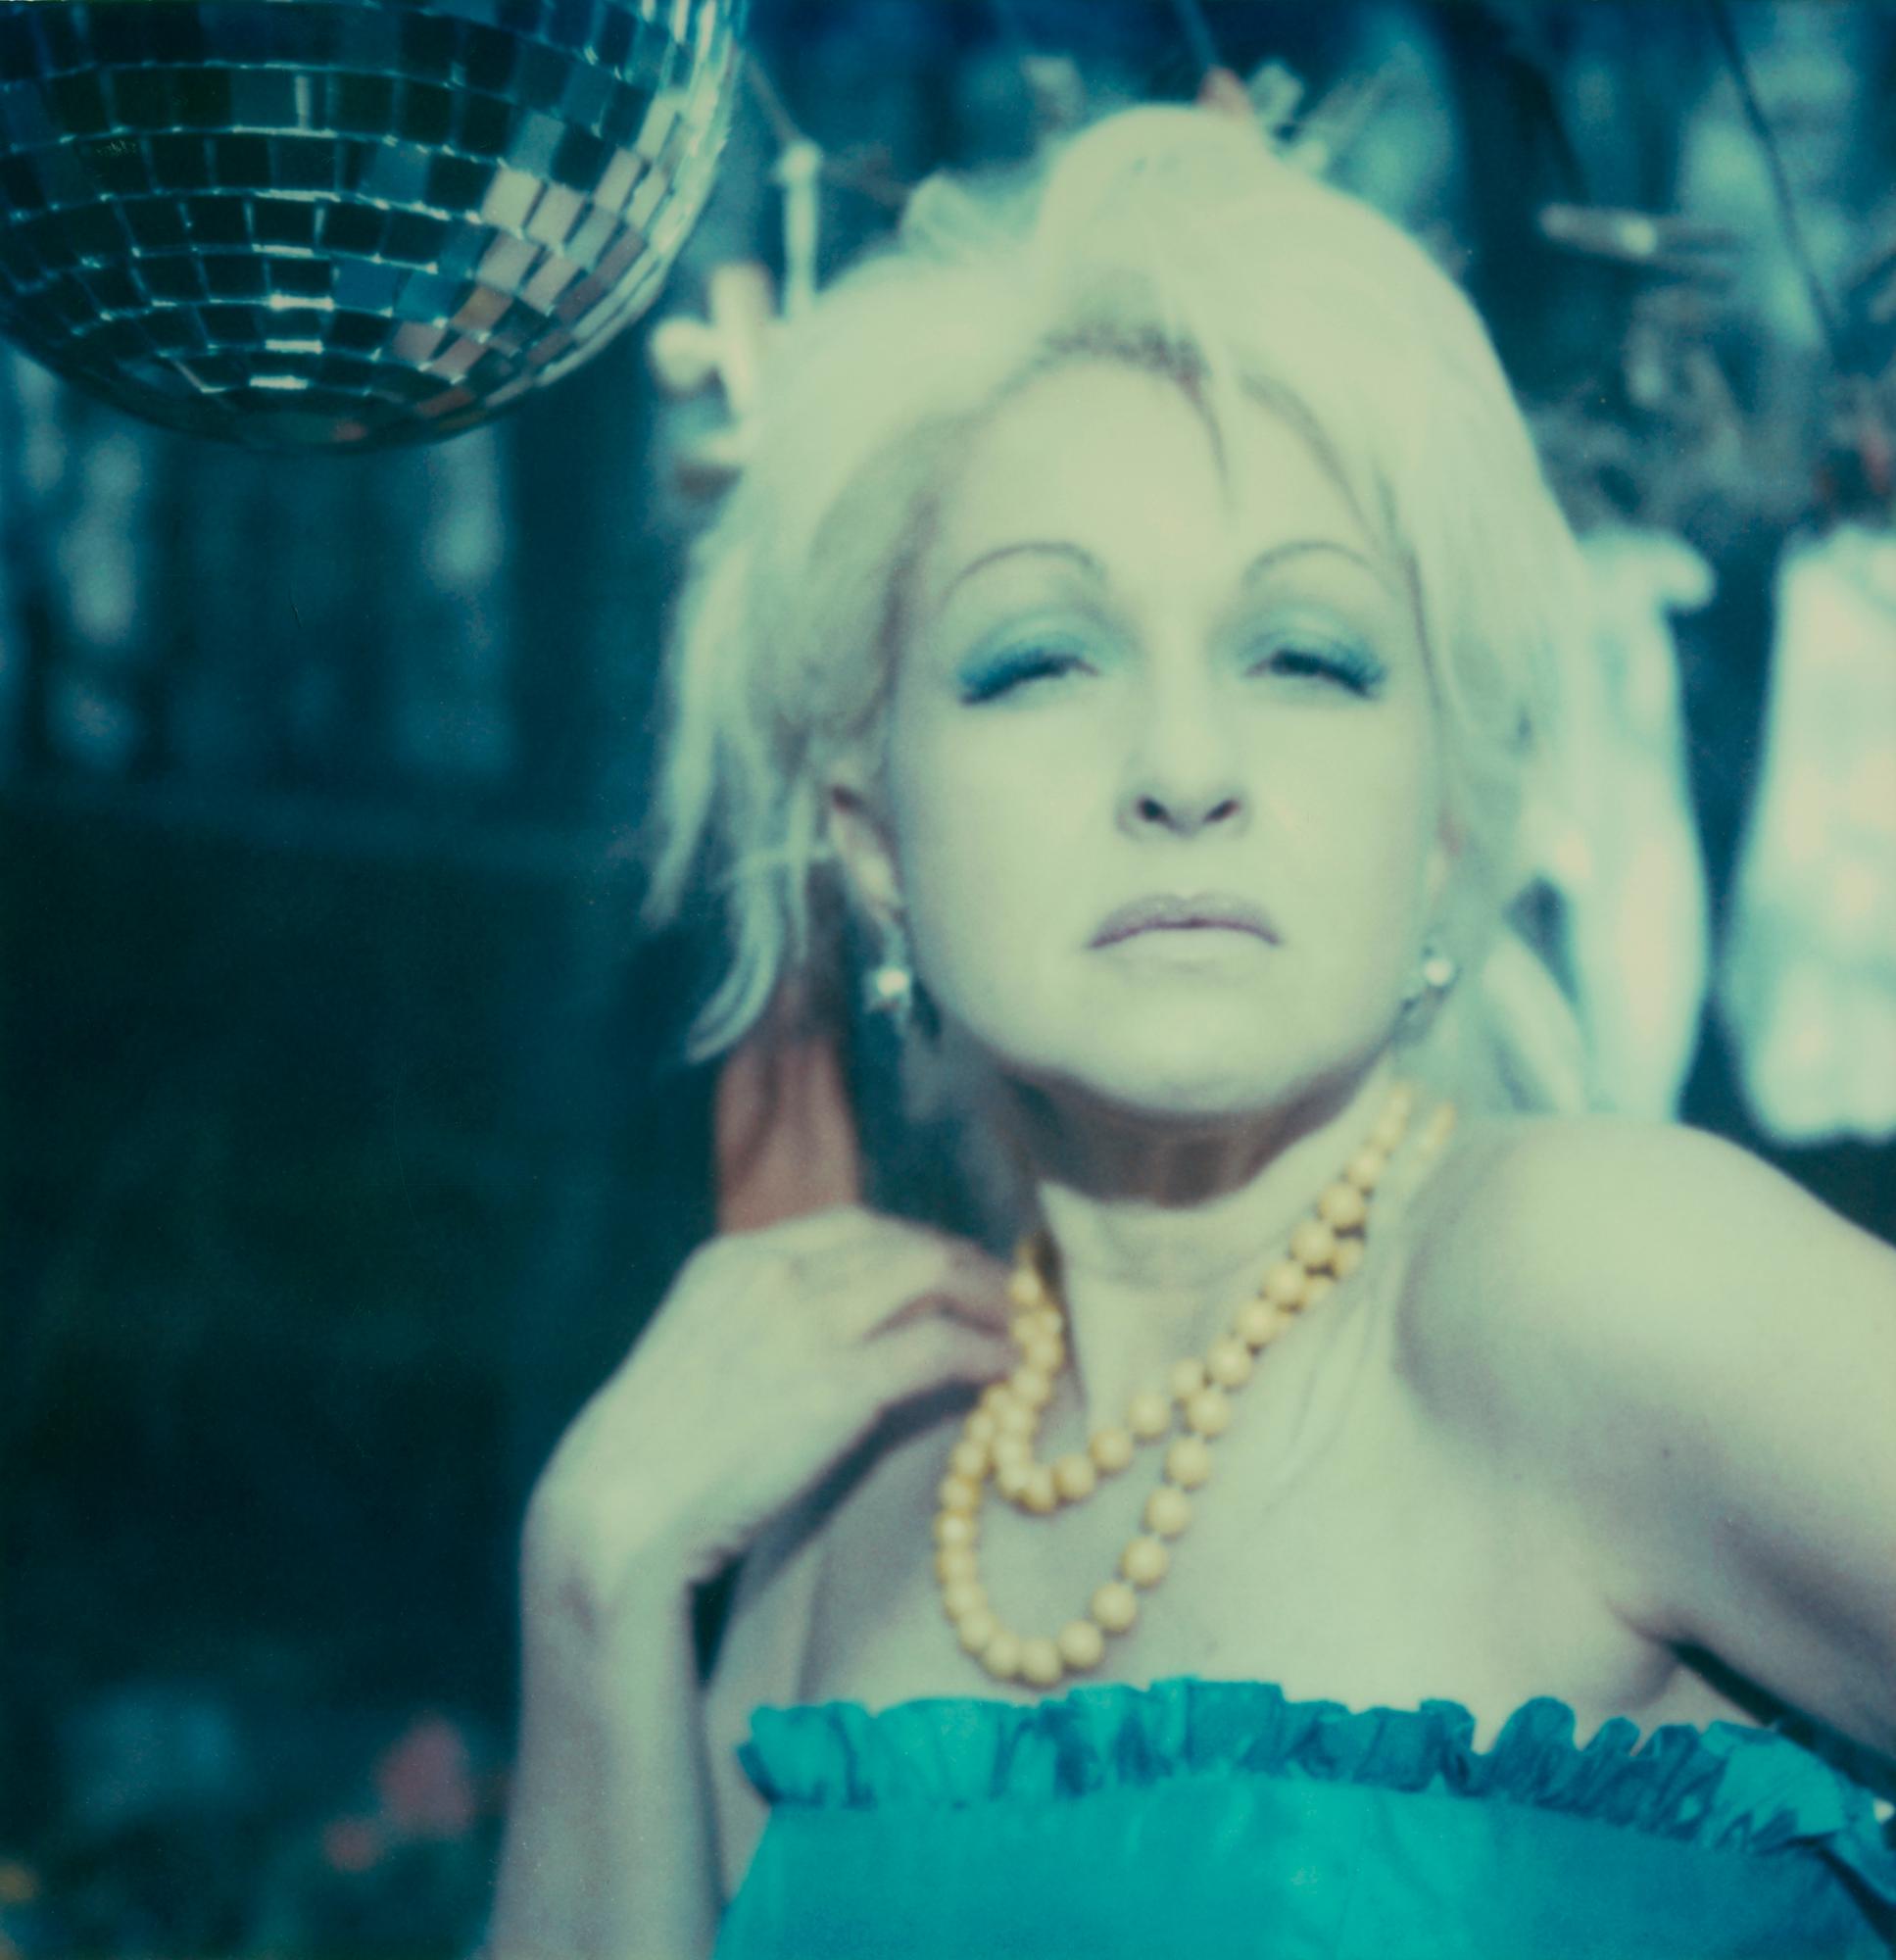 Stefanie Schneider Color Photograph - Untitled 10 (Cyndi Lauper) - record cover shoot